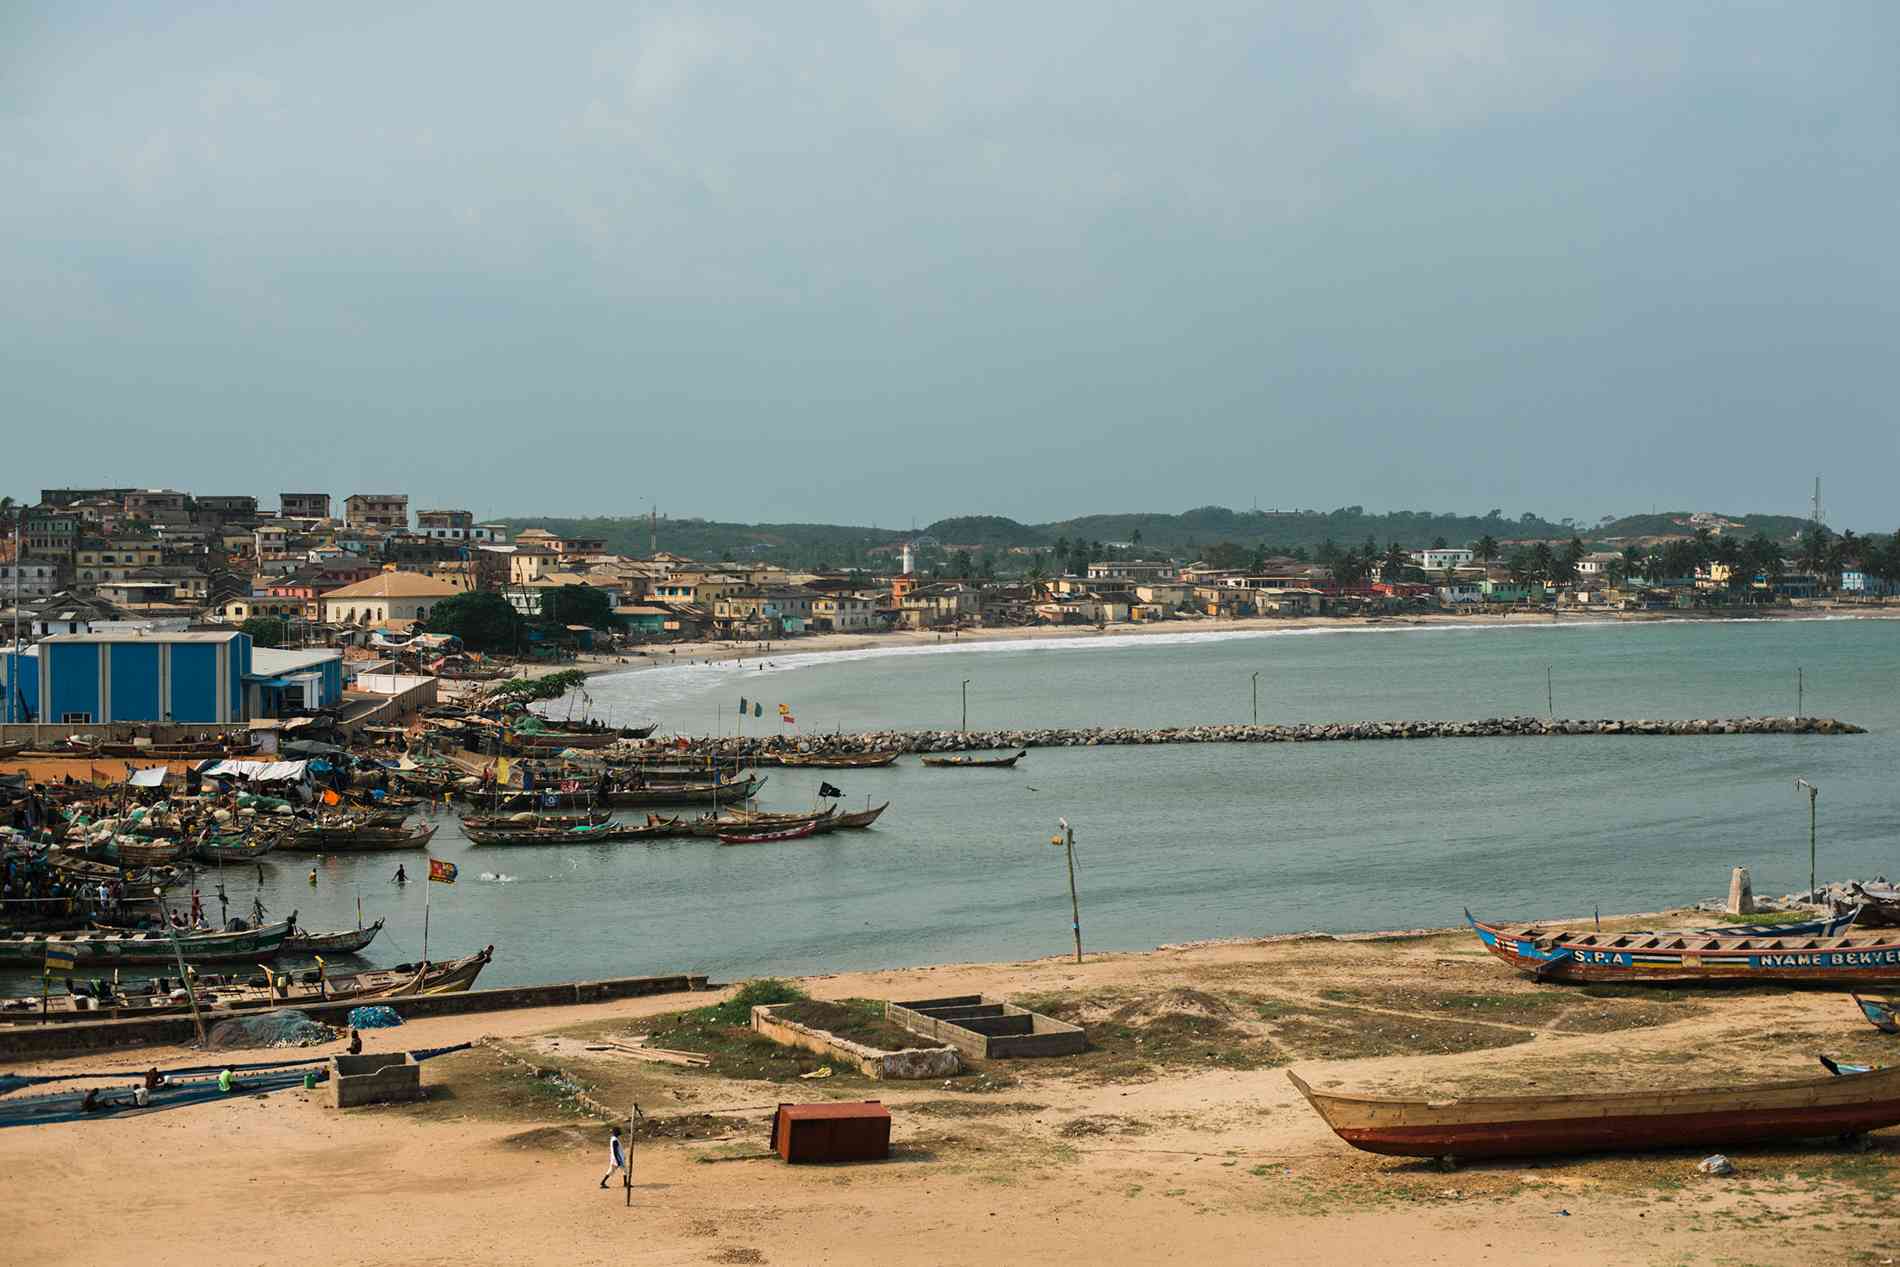 Remote work can have outsized positive impact in cities like Accra